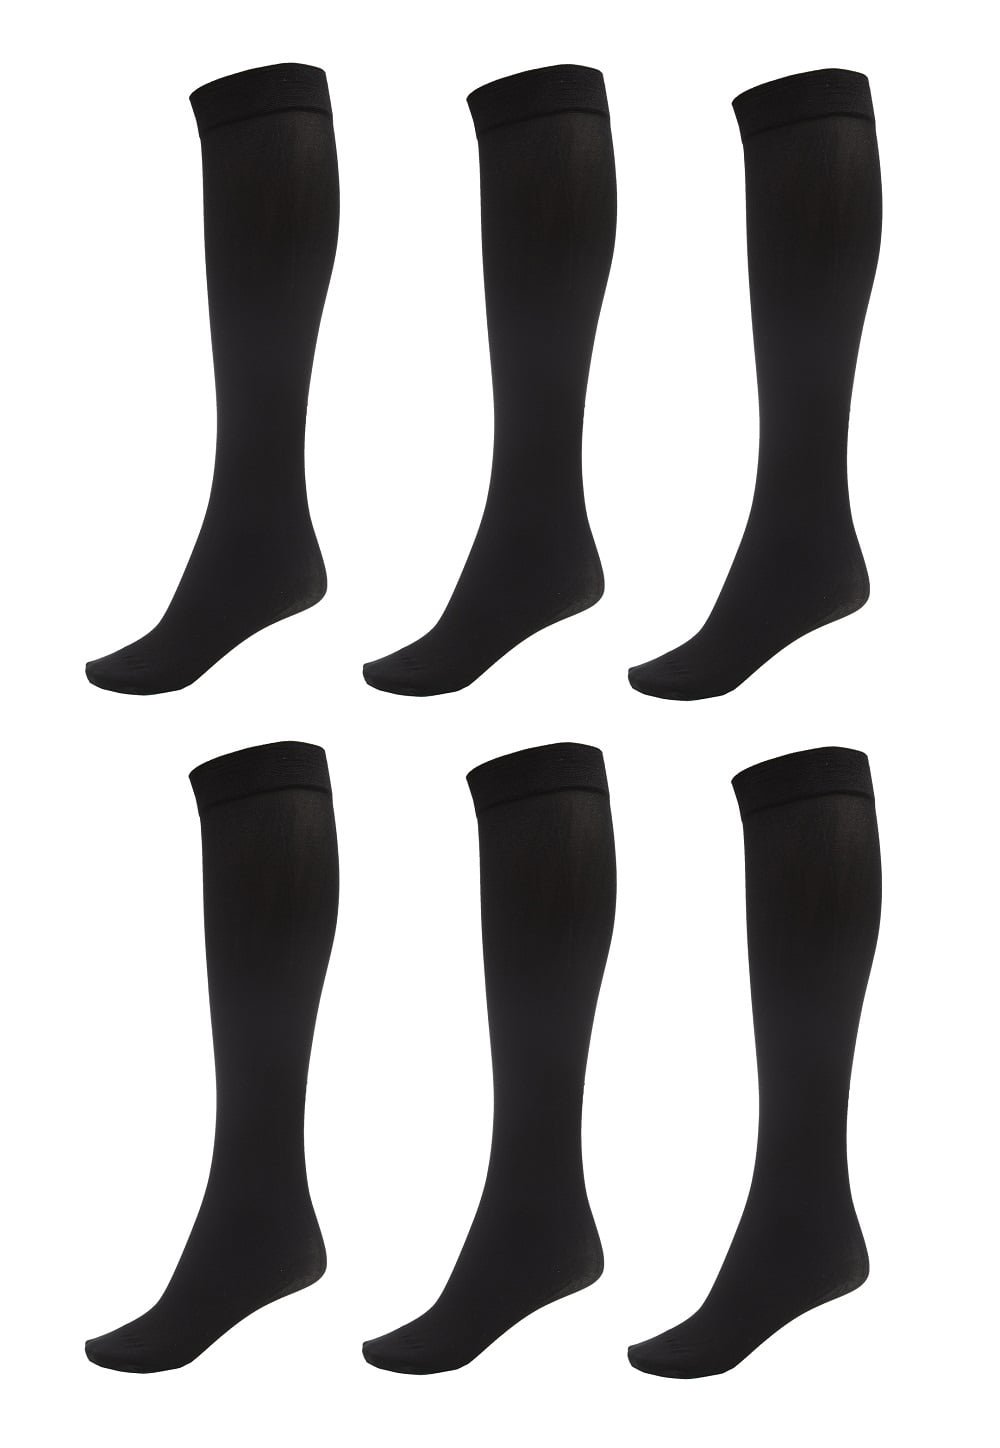 DARESAY Women Trouser Socks with Comfort Band Spandex Opaque Knee High ...